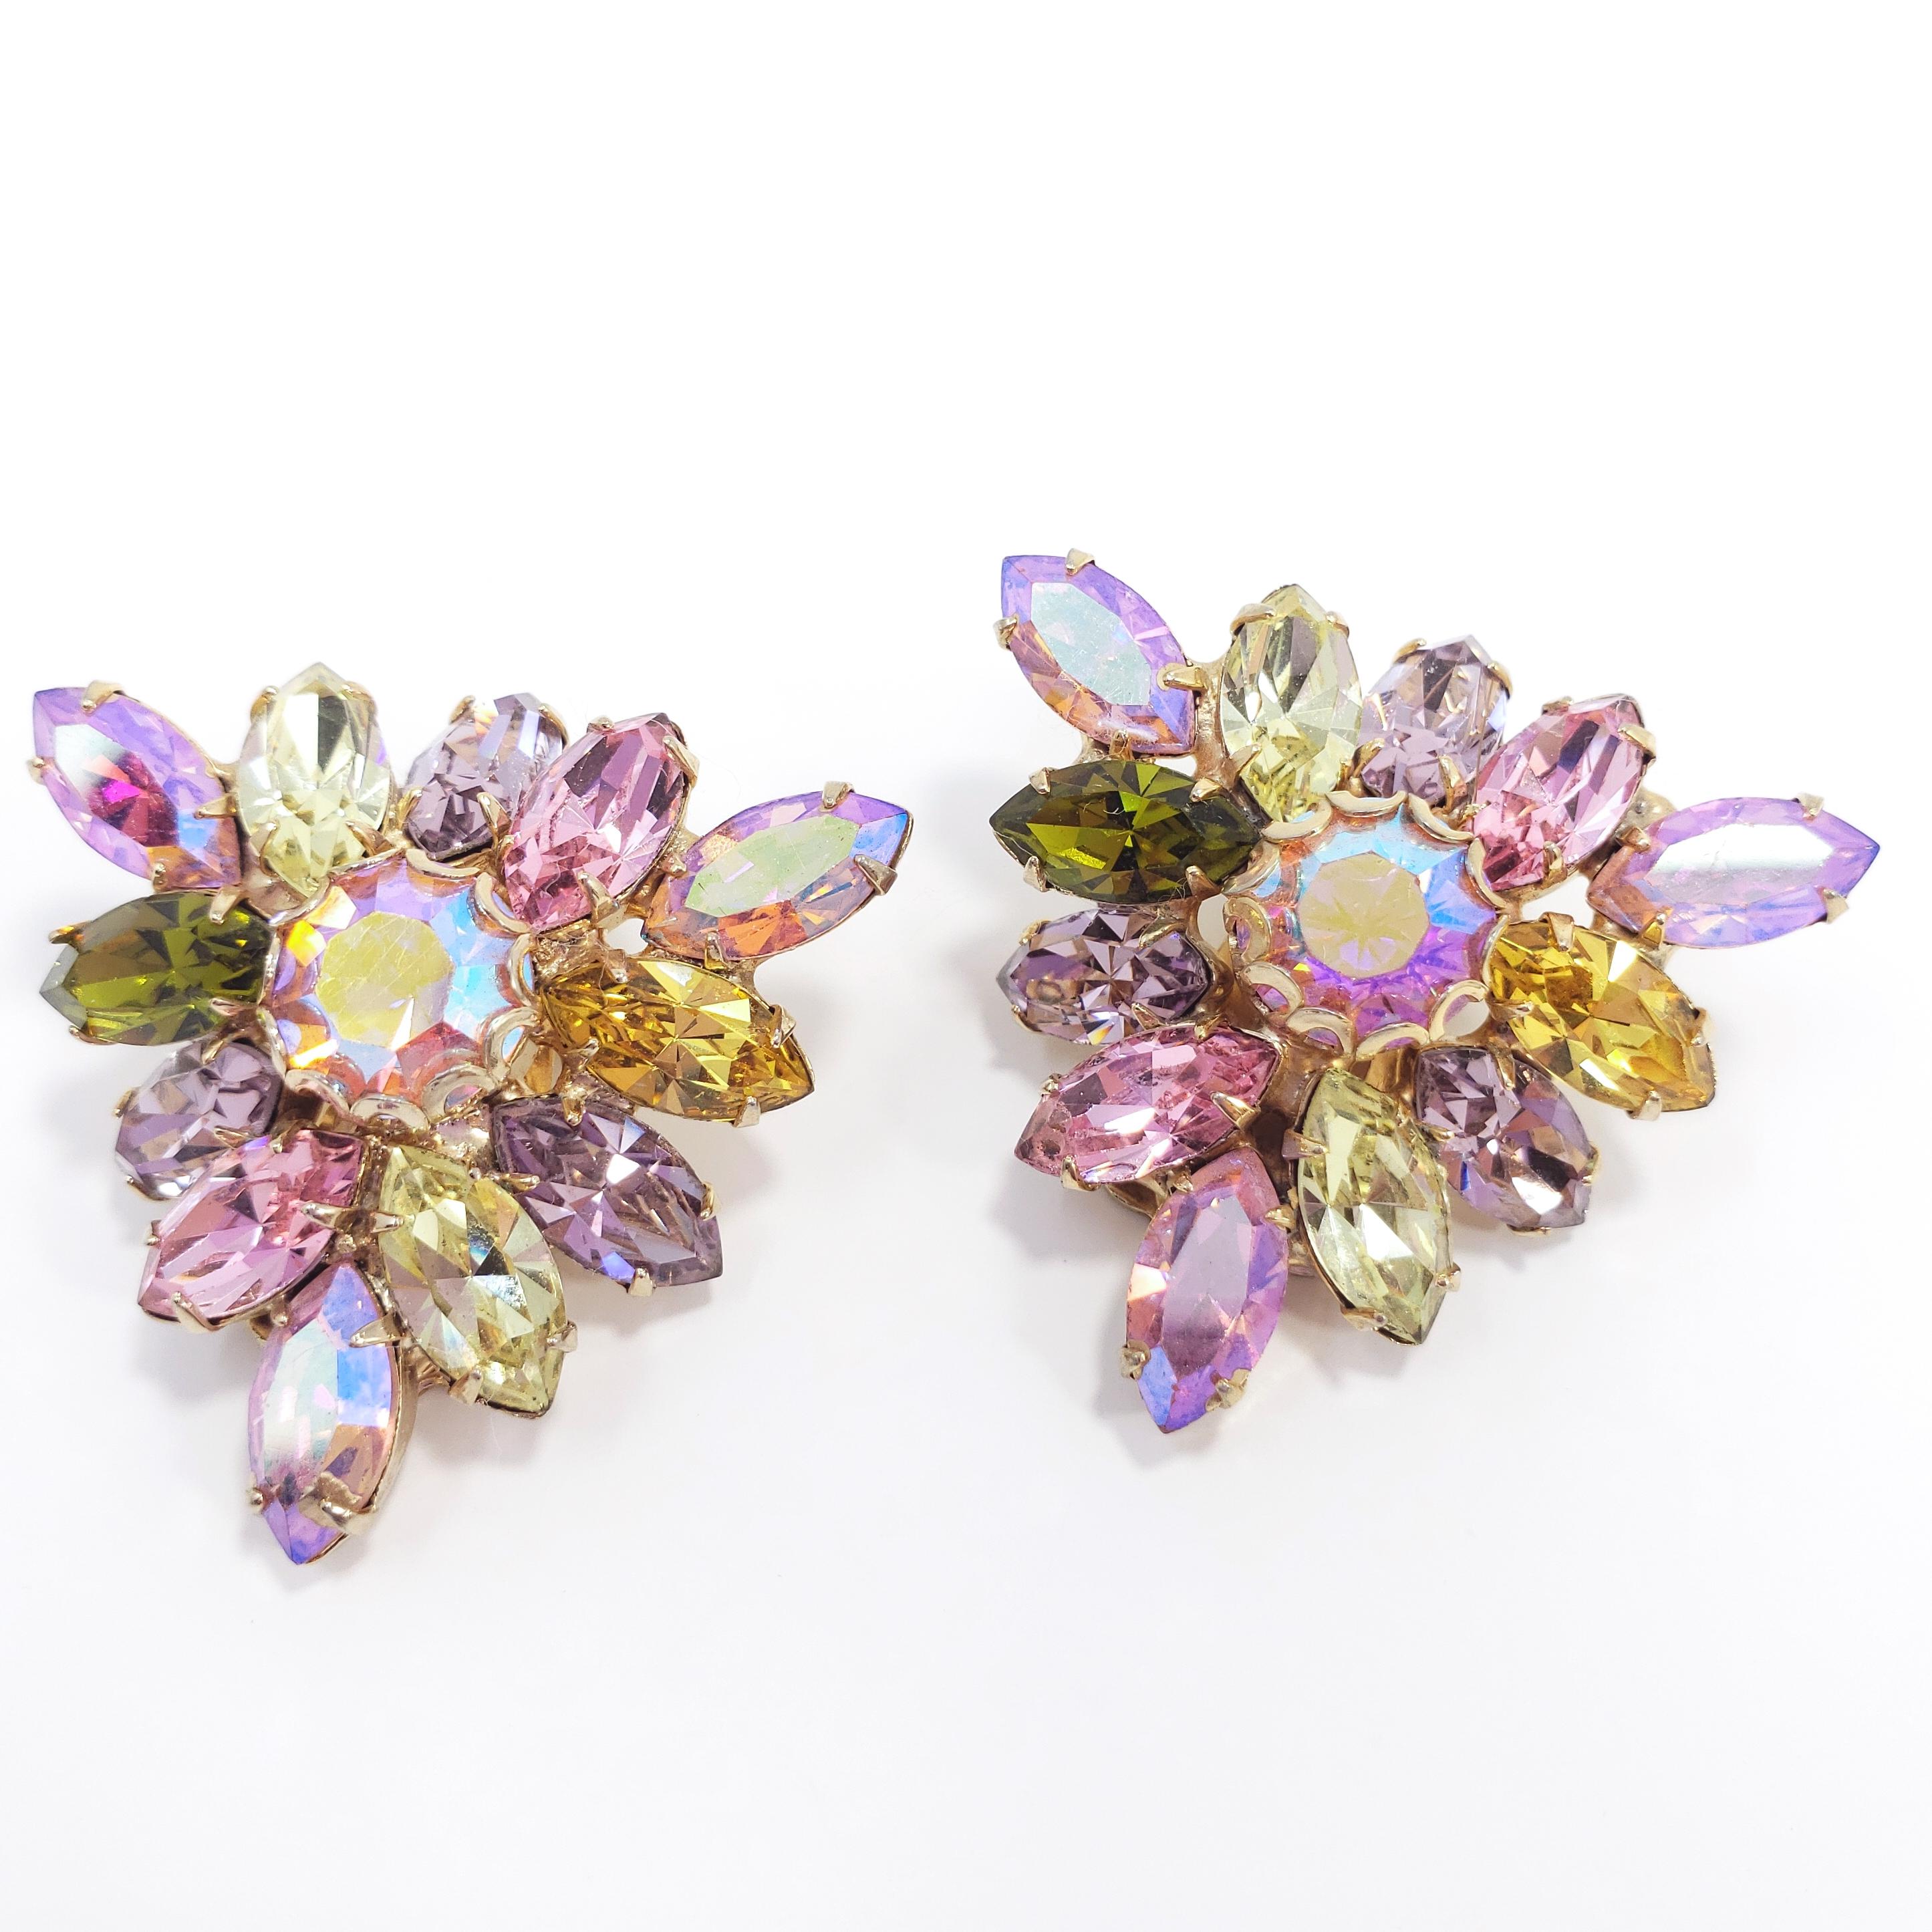 Colorful clip on earrings by Weiss. Each earring features a custom prong-set aurora borealis chaton surrounded with a cluster of aurora borealis, rose, amethyst, peridot, and olive navette crystals. Geometric, triangular, art-deco shape.

Hallmarks: